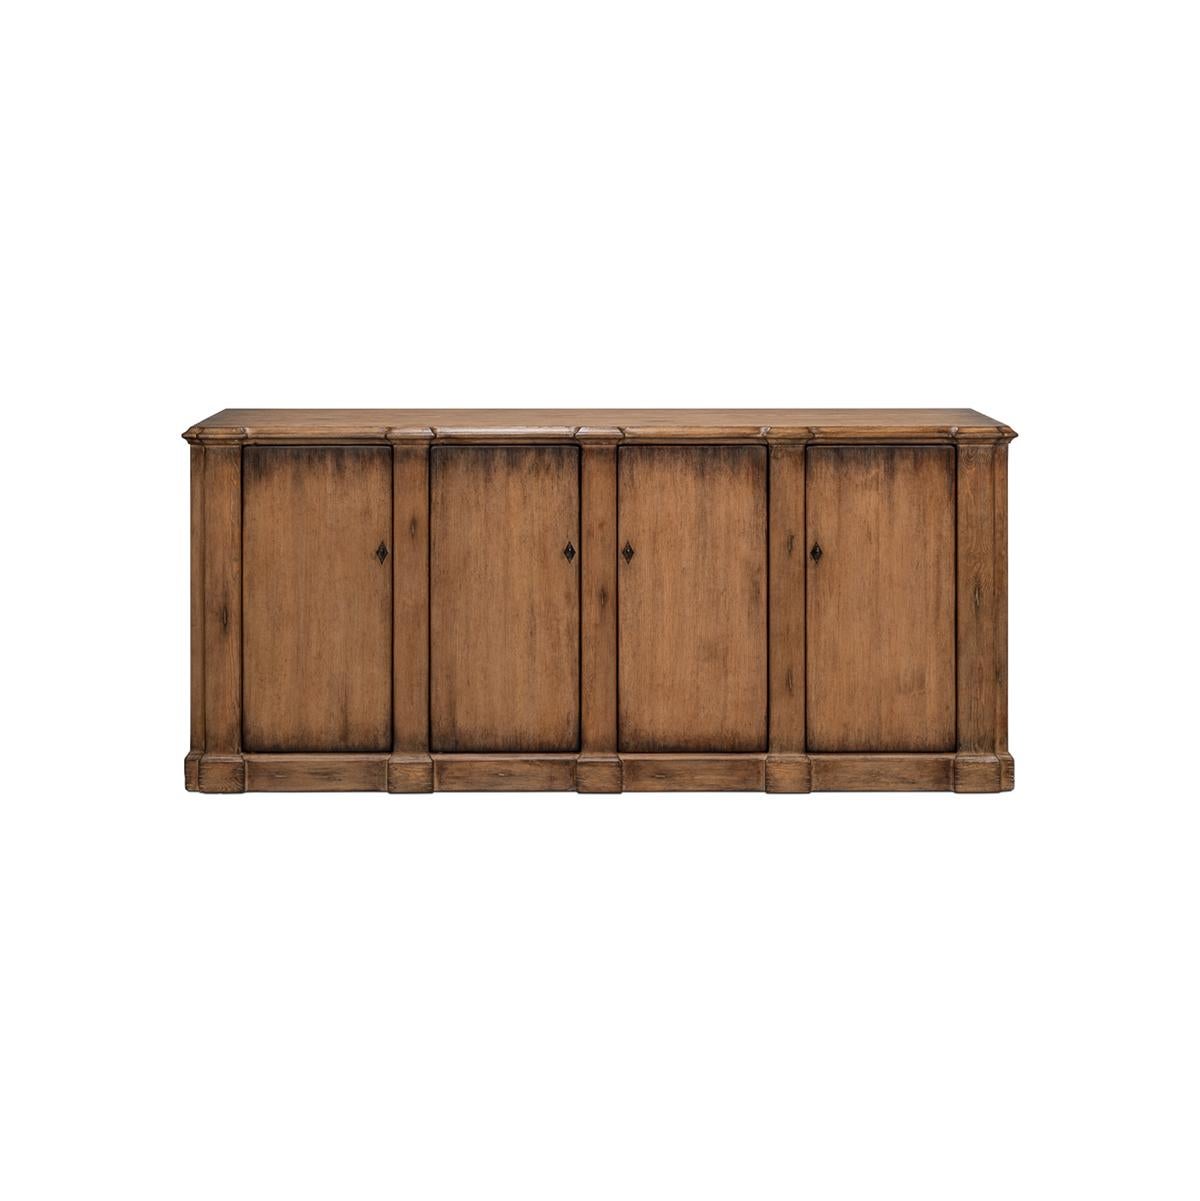 This piece captures the romantic essence of country style with its rich, warm wood finish and classic design. The sideboard's generous length, accented by four doors that open to a fitted interior with removable shelves, offers substantial storage